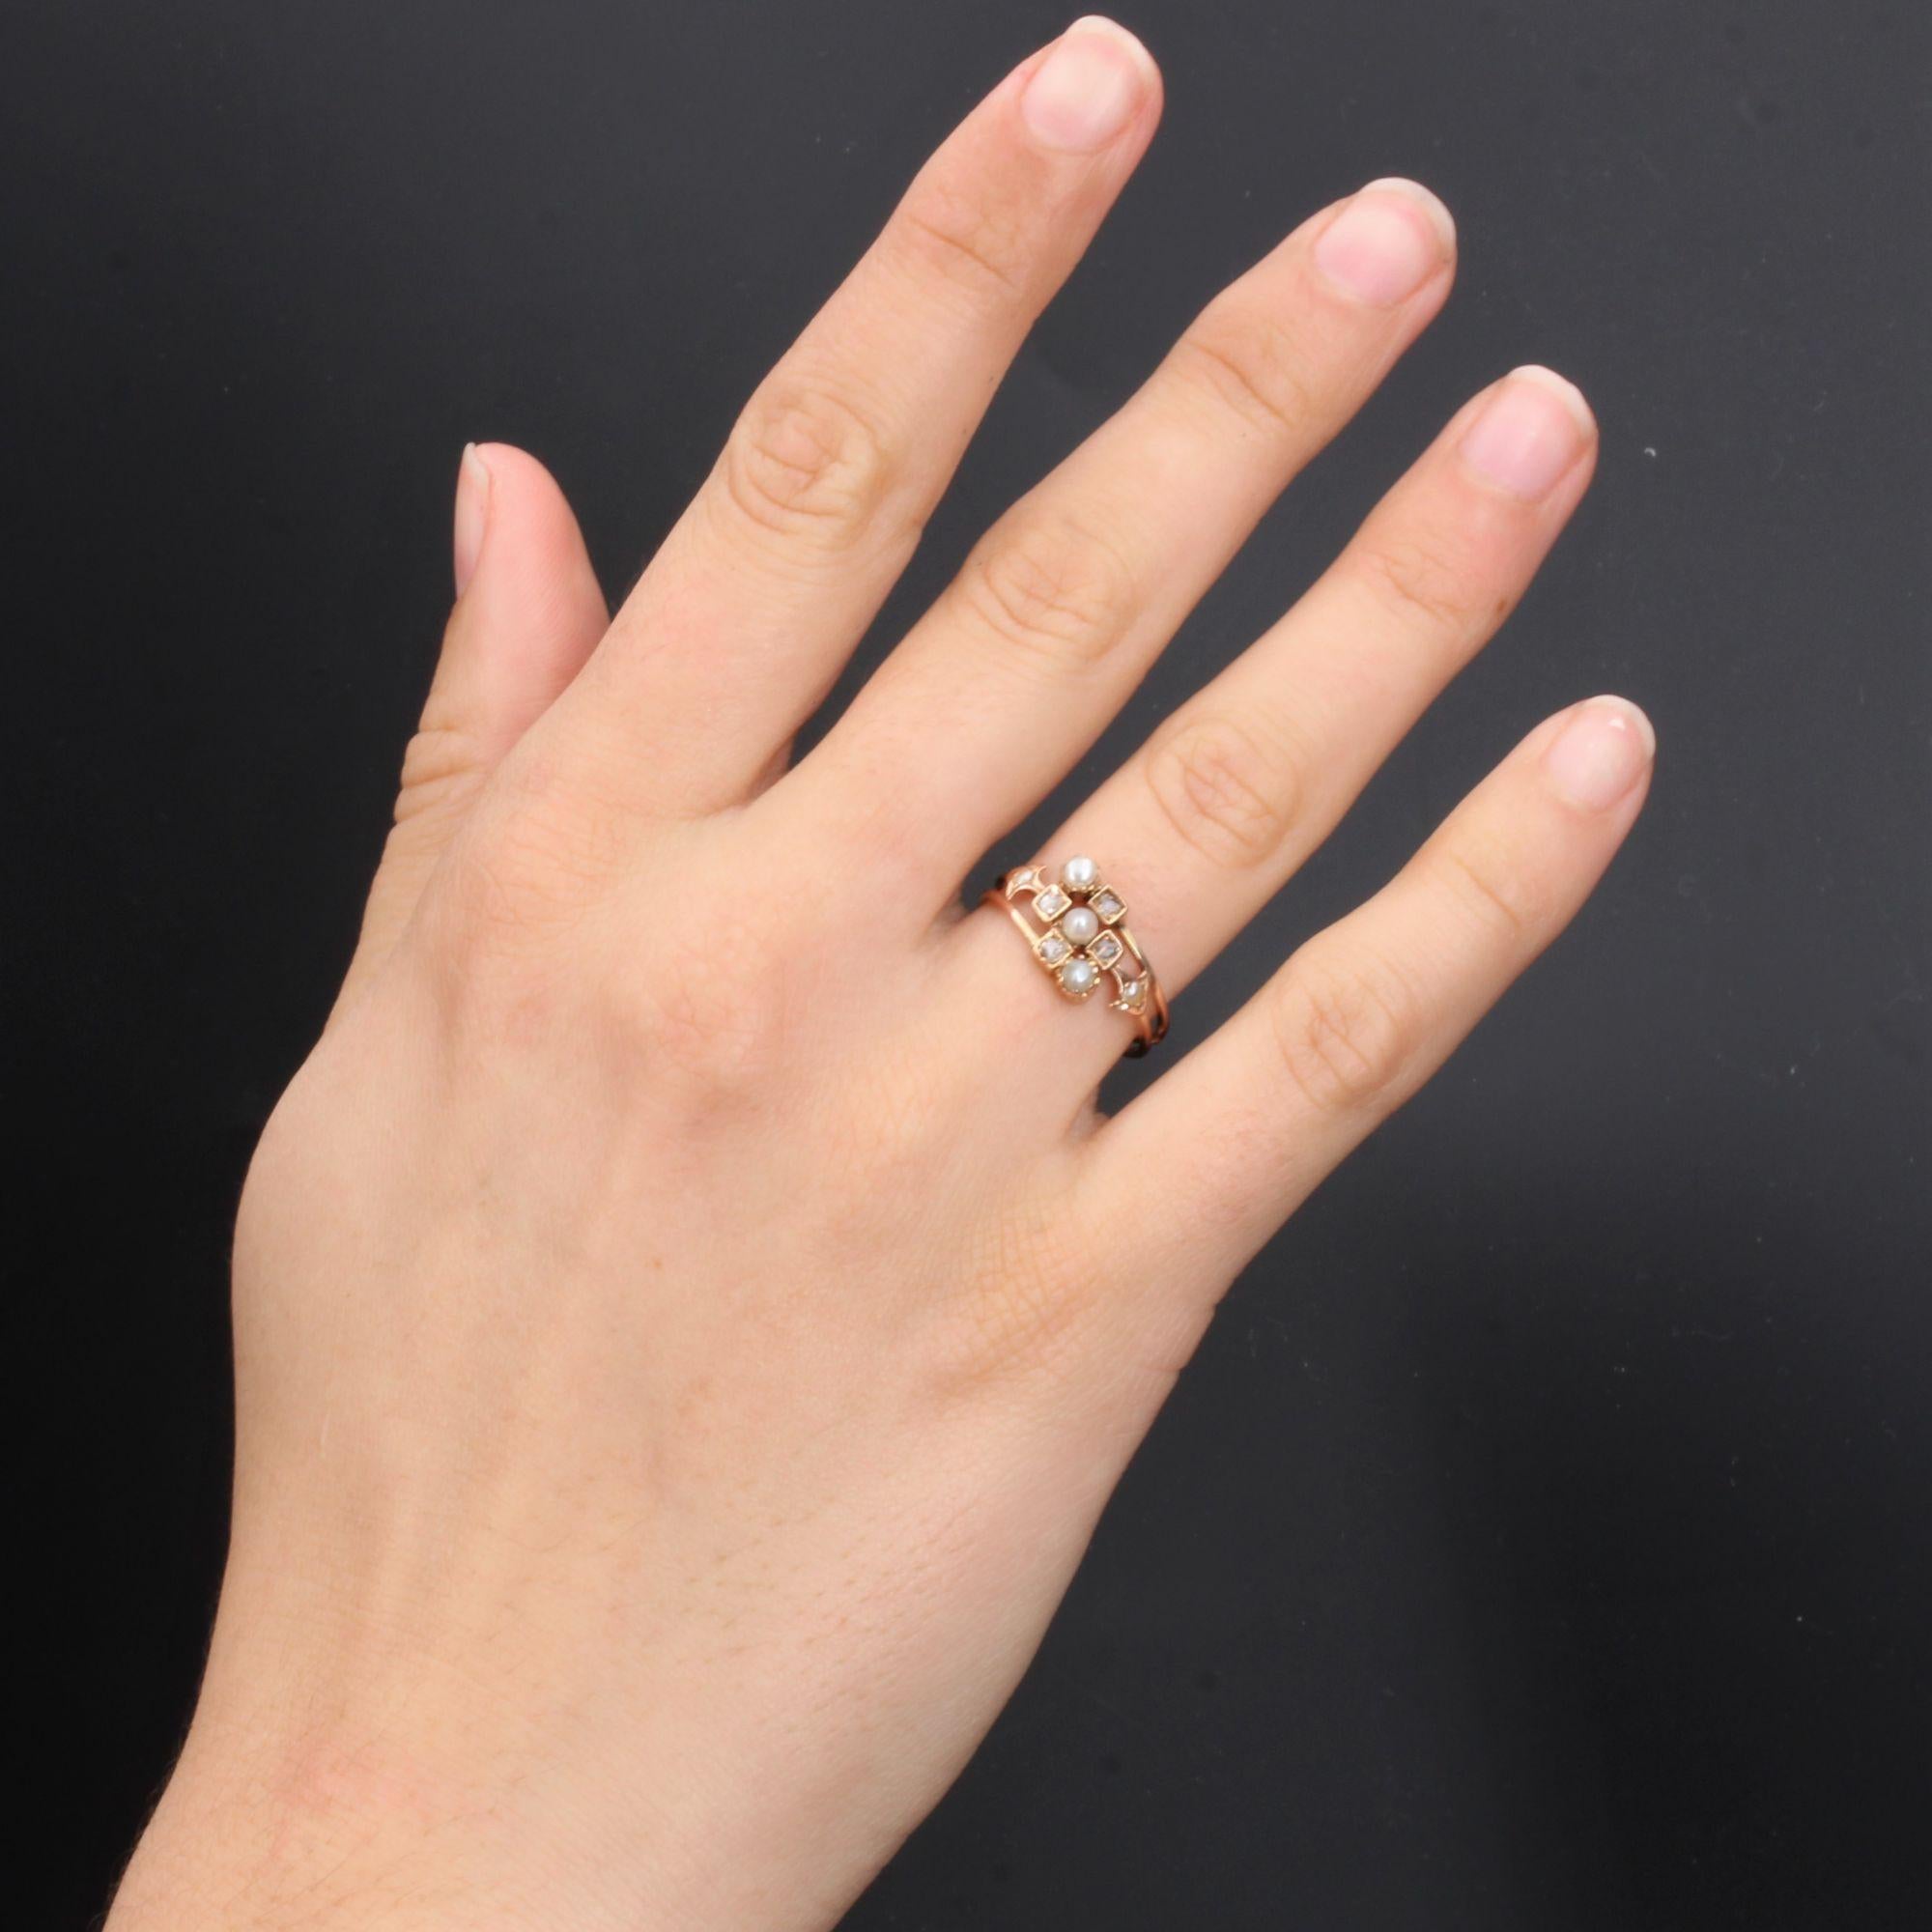 Ring in 18 karat rose gold, eagle head hallmark.
Delightful antique charming jewel, it is decorated on the top of 3 half natural pearls and 4 rose- cut diamonds in geometrical setting on both sides of this pattern. The start of the ring is set with